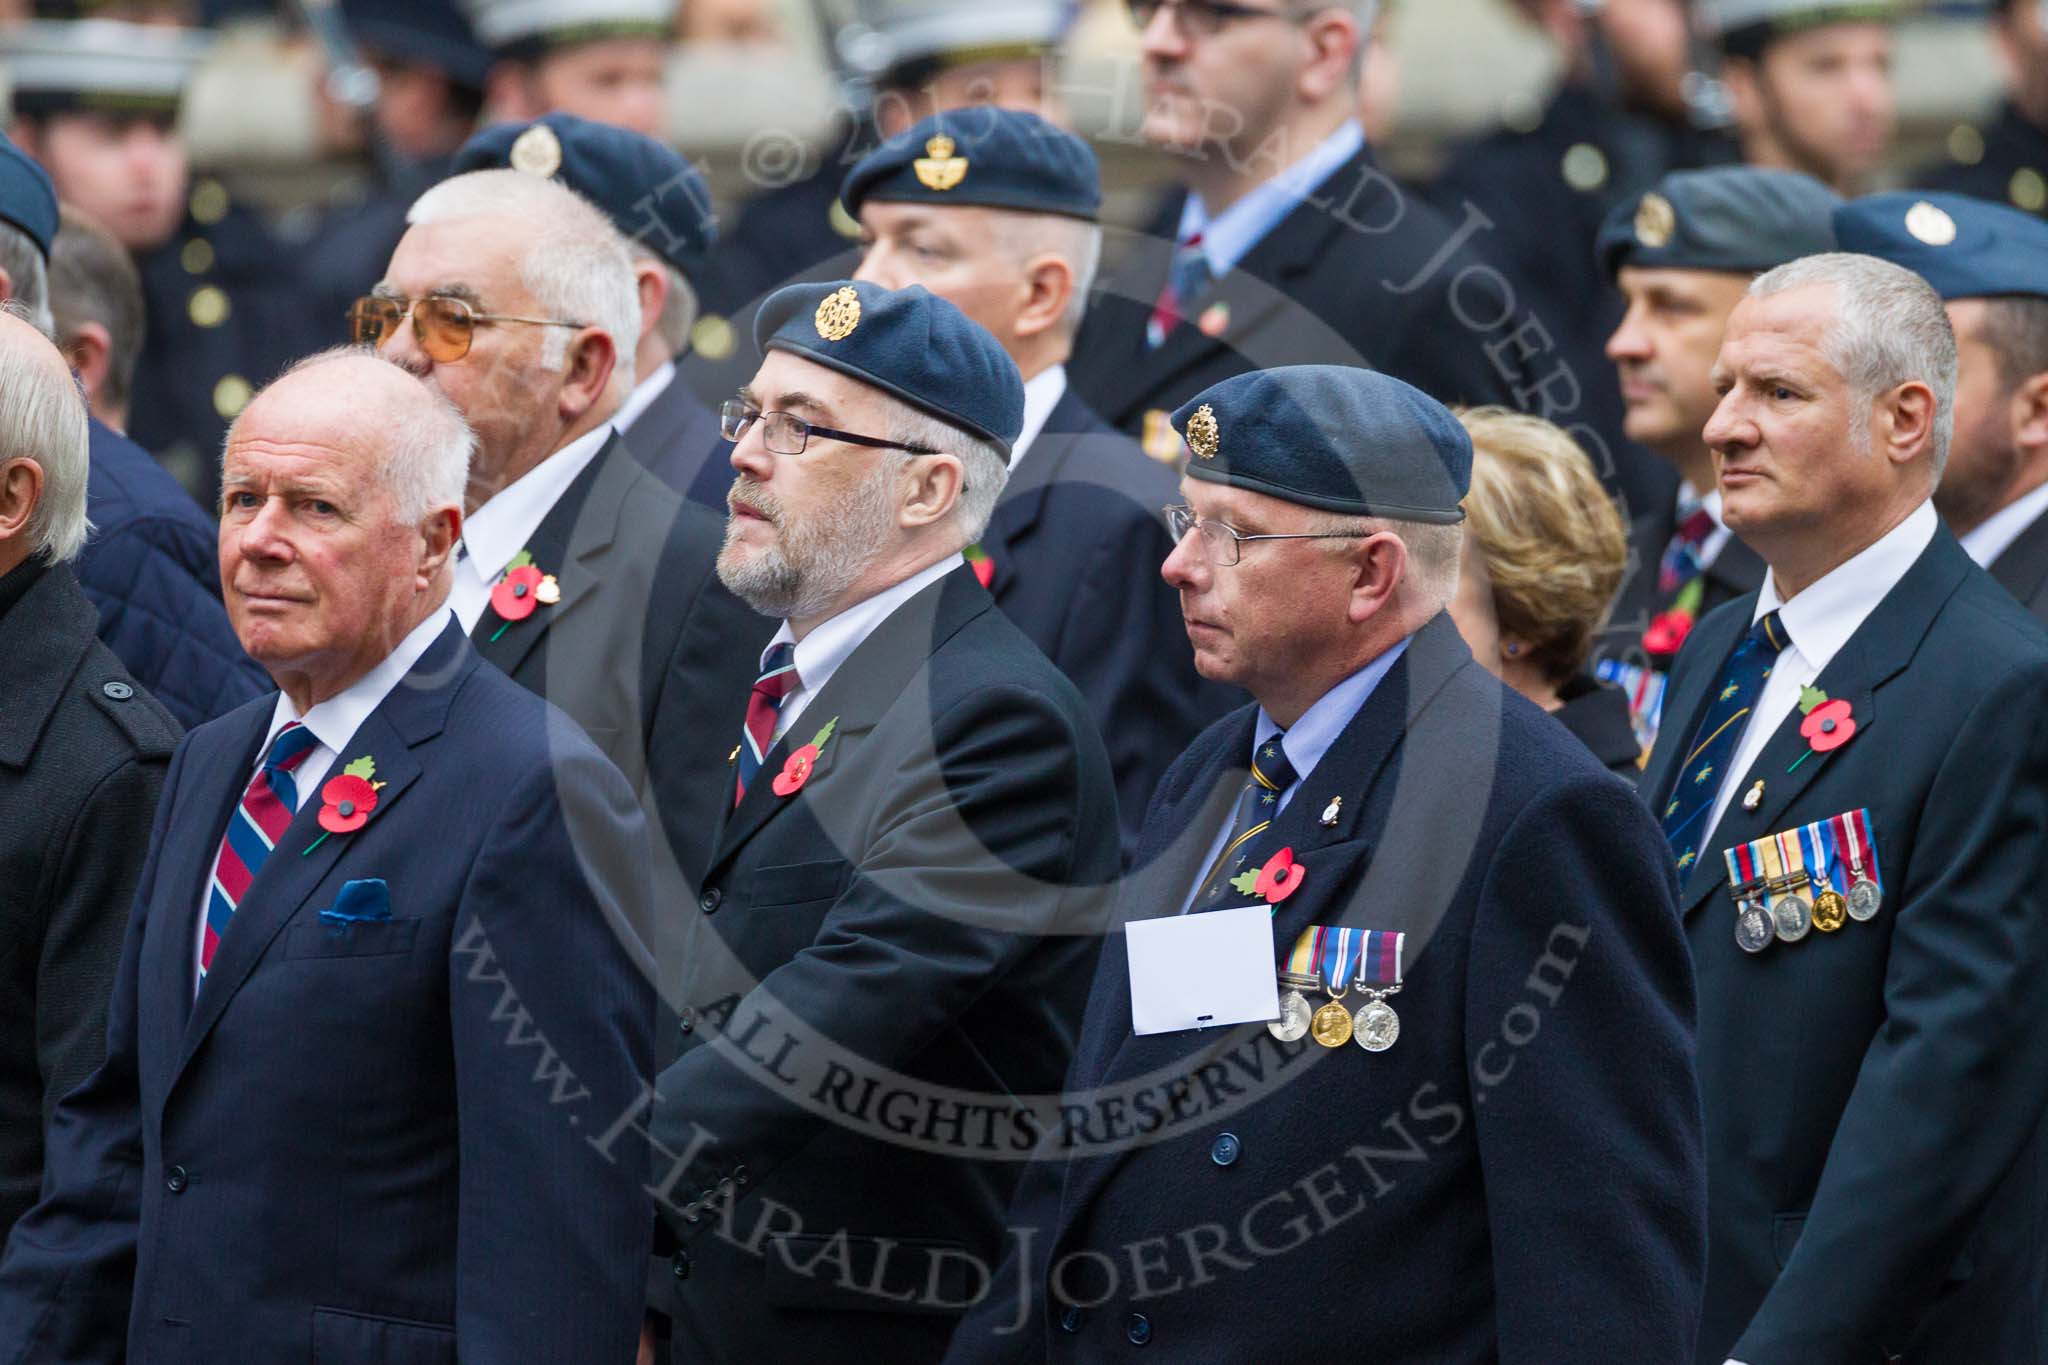 Remembrance Sunday at the Cenotaph 2015: Group C17, Royal Air Force Movements and Mobile Air Movements Squadron Association (RAF MAMS) (New for 2015).
Cenotaph, Whitehall, London SW1,
London,
Greater London,
United Kingdom,
on 08 November 2015 at 11:49, image #522